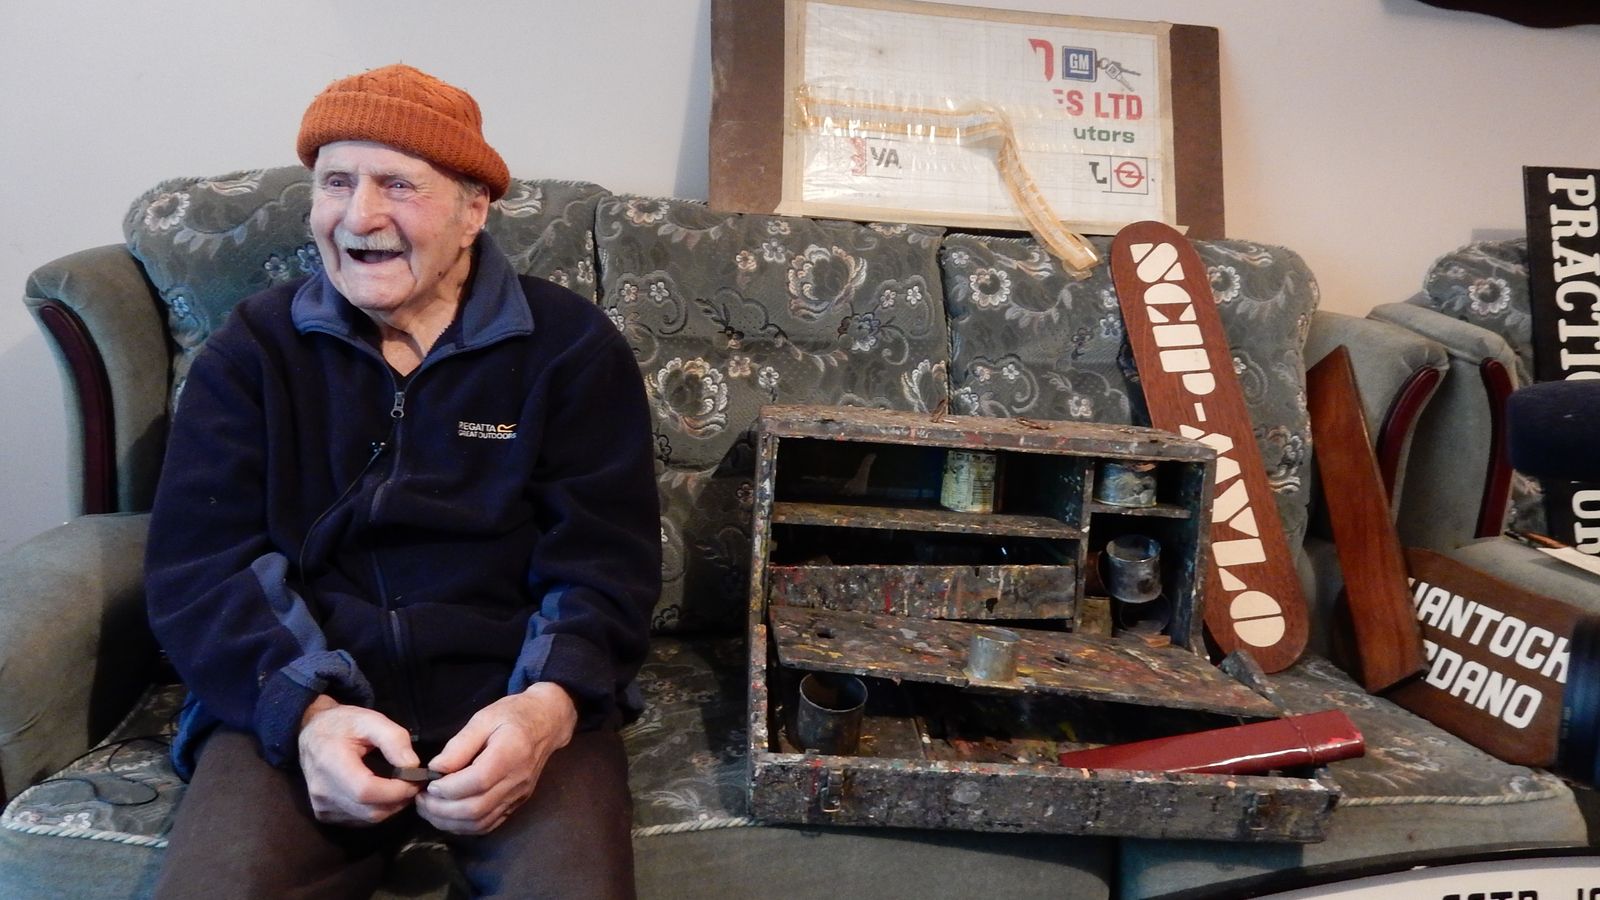 Elderly man on a sofa with his sign painting kit and various painted signs.